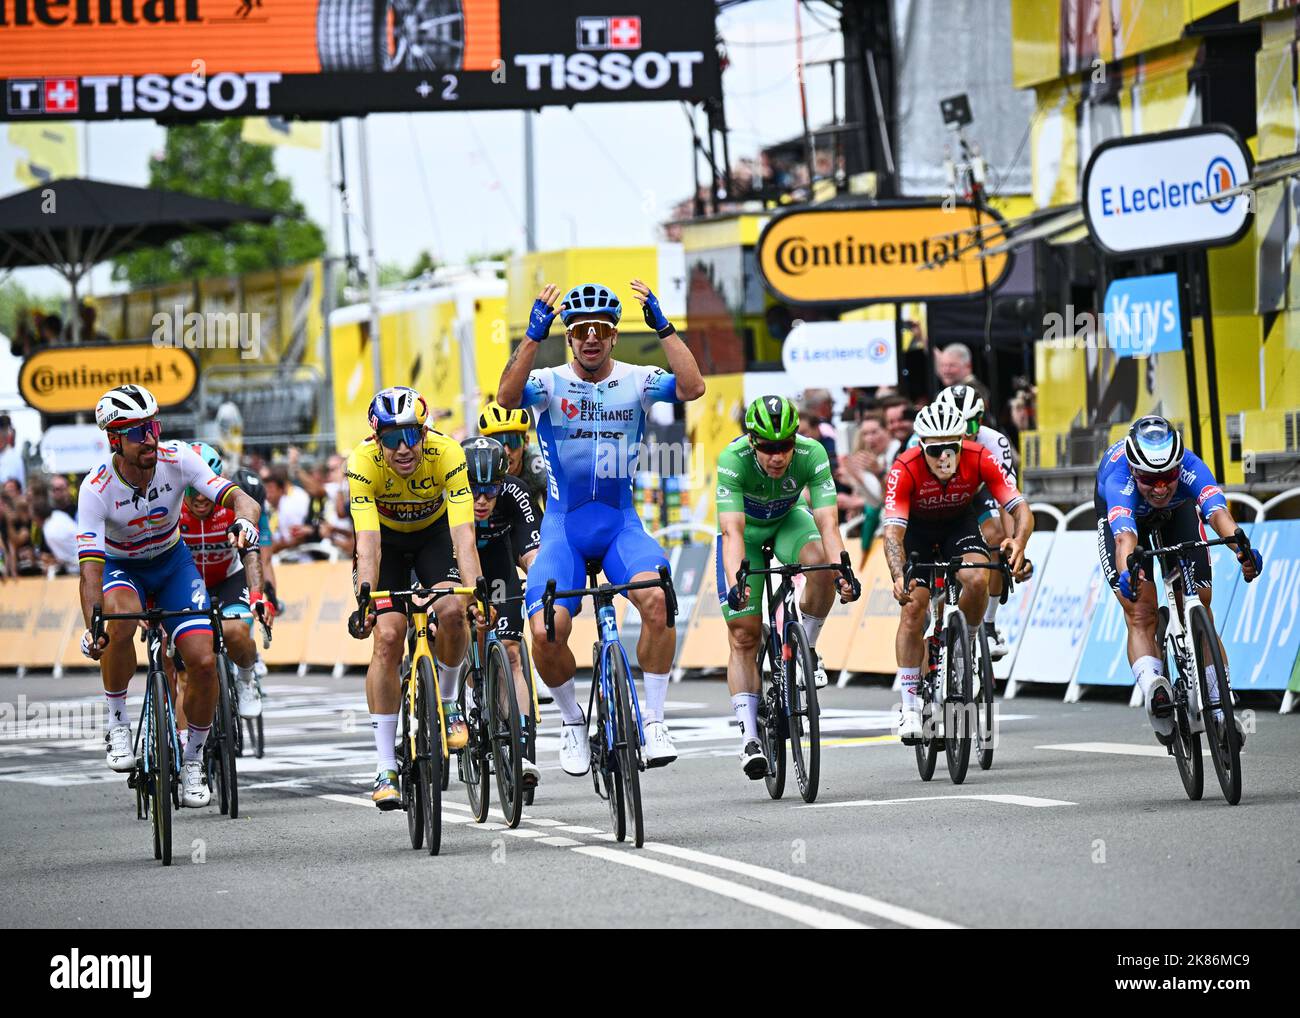 Dylan GROENEWEGEN beating Wout VAN AERT, Peter SAGAN, Jasper PHILIPSEN to the line for the stage win on Tour De France, Stage 3, Denmark, 3rd July 2022, Credit:Pool/Goding Images/PA Images Stock Photo